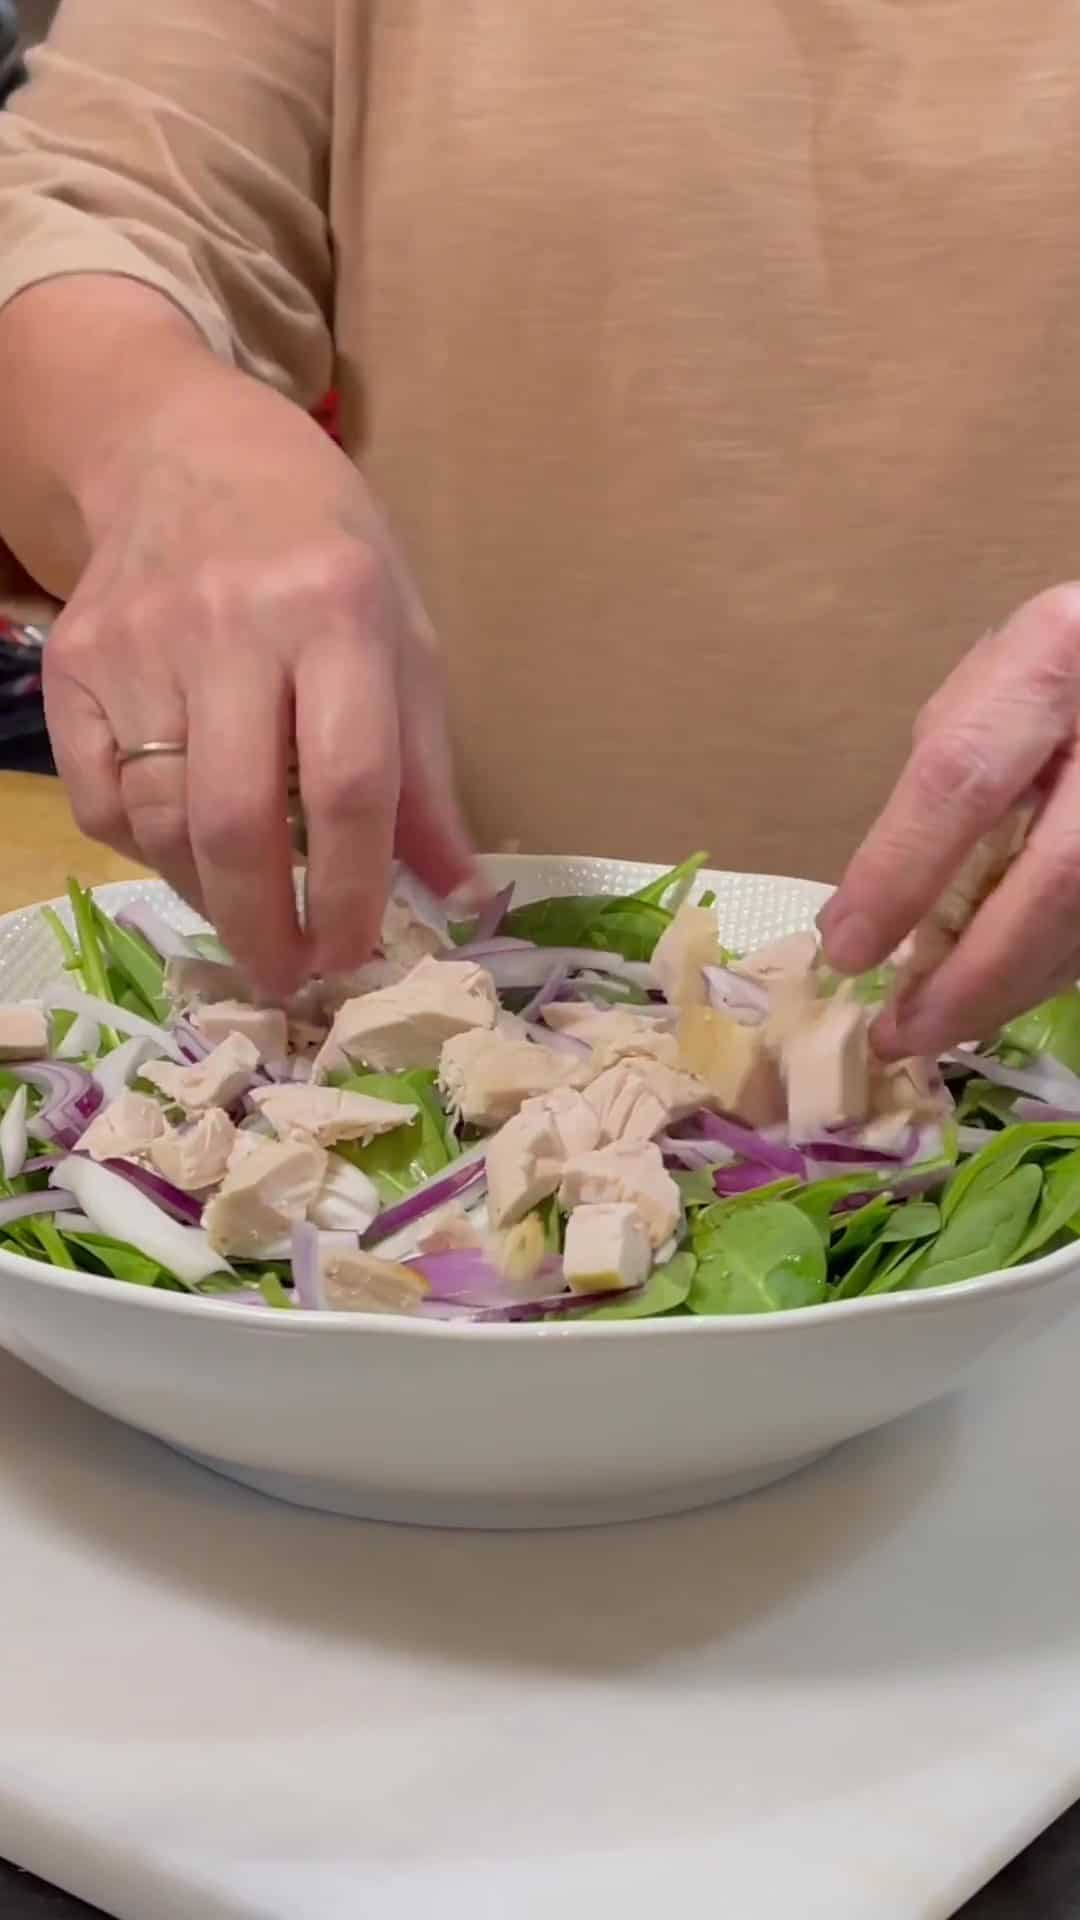 Chopped cooked chicken being added to a salad bowl.